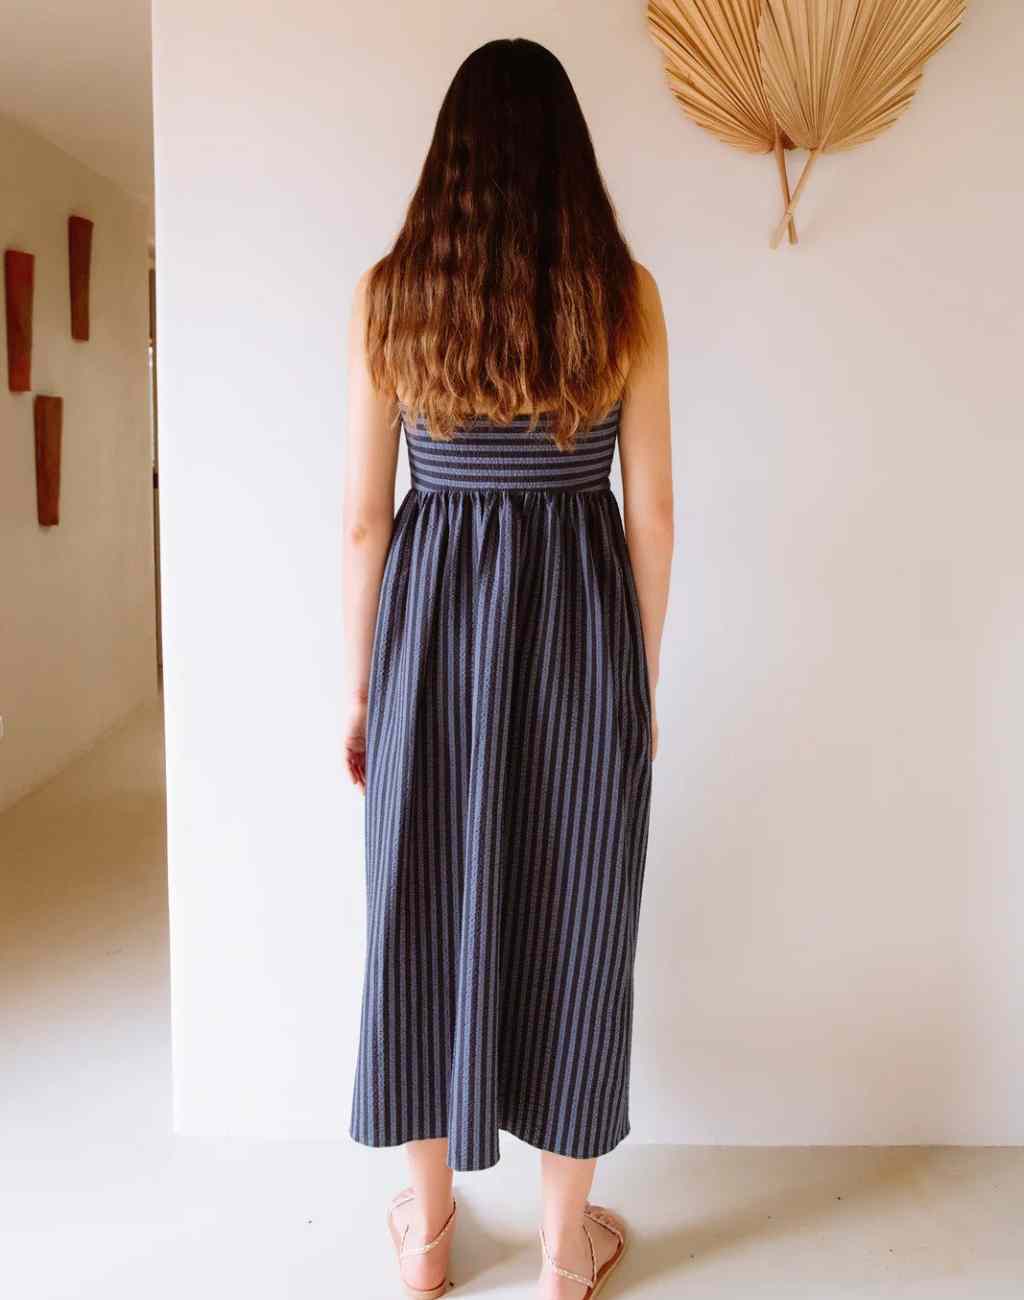 Blue Striped Seersucker Sundress with Tie Front and Spaghetti Straps